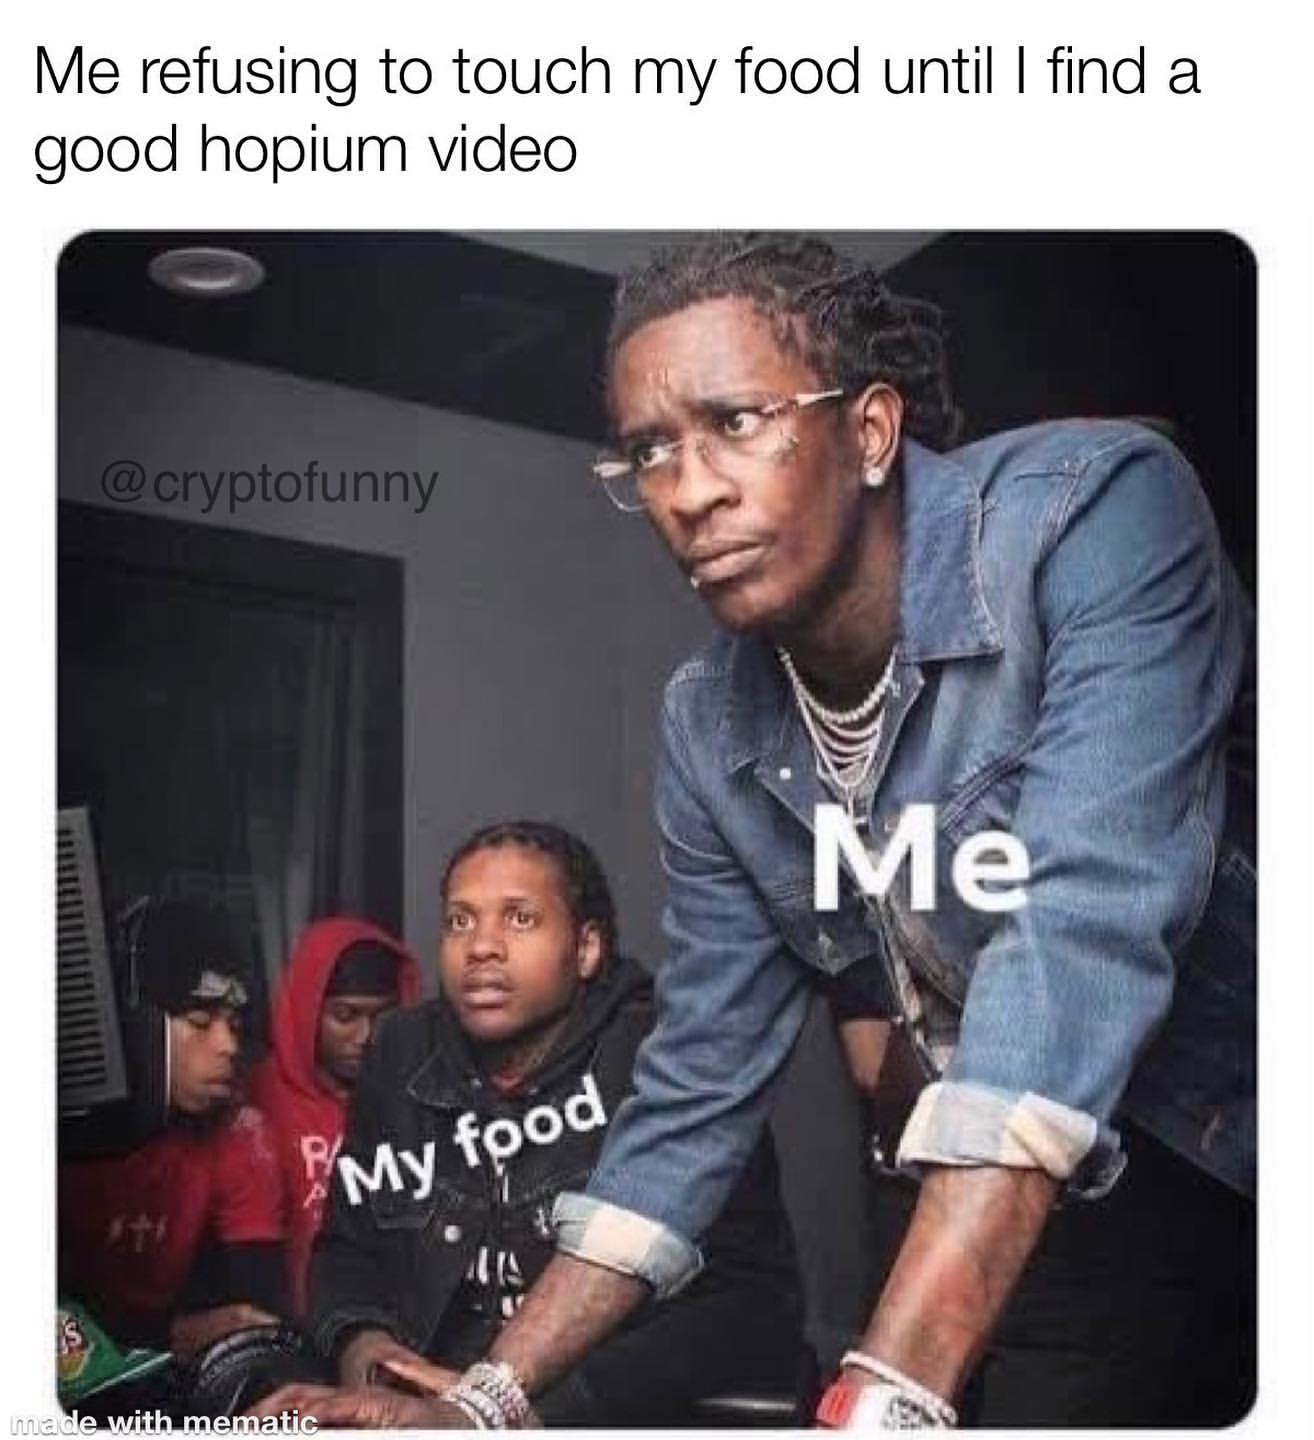 Me refusing to touch my food until I find a good hopium video. My food. Me.